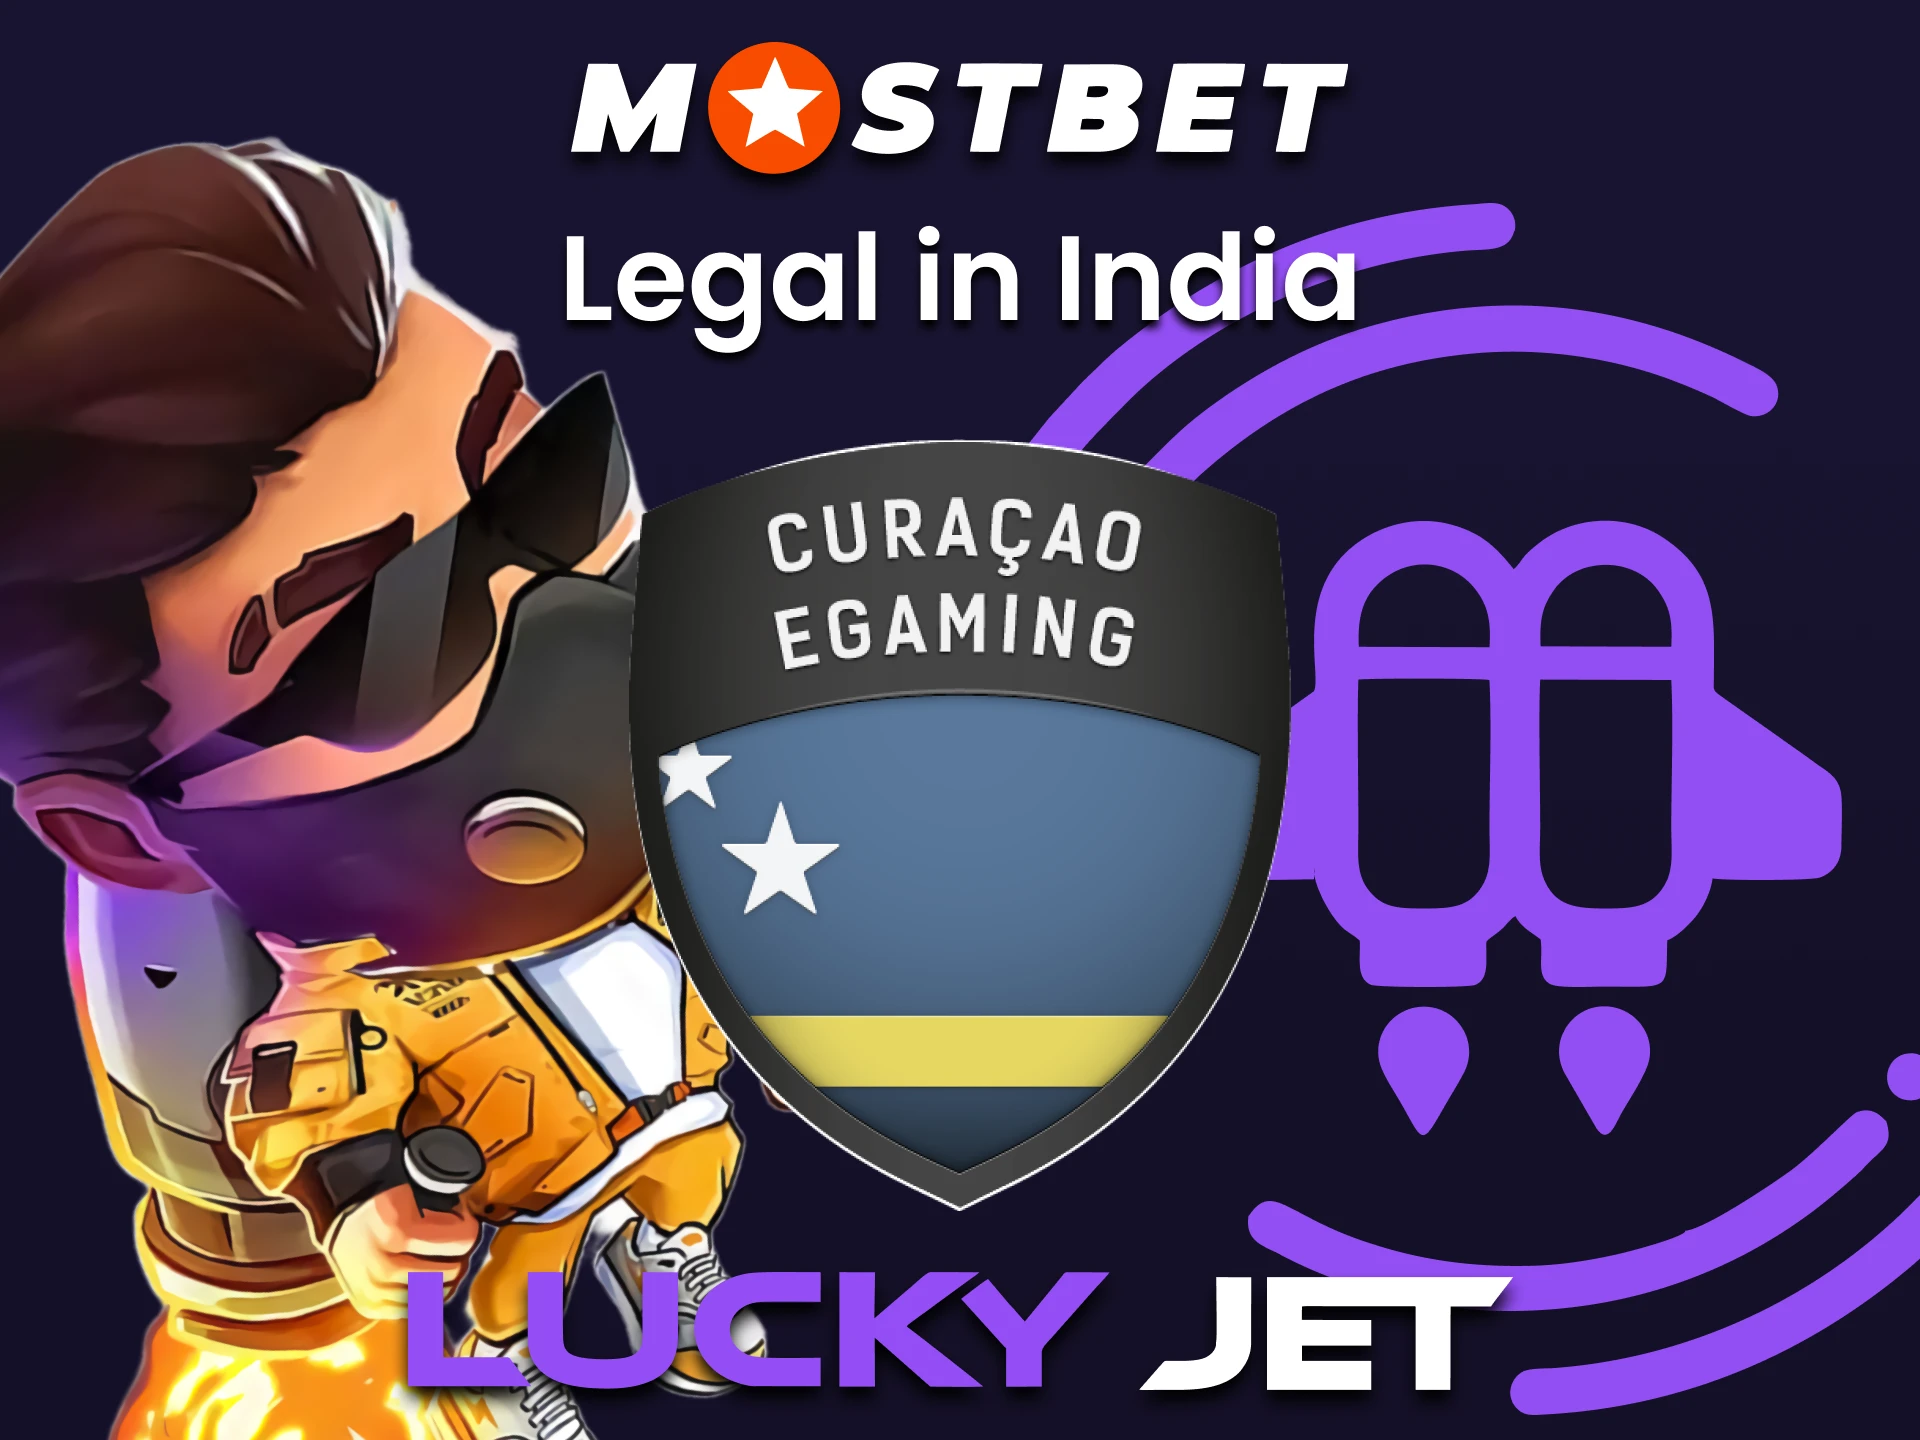 It is absolutely legal to play Lucky Jet at Mostbet.